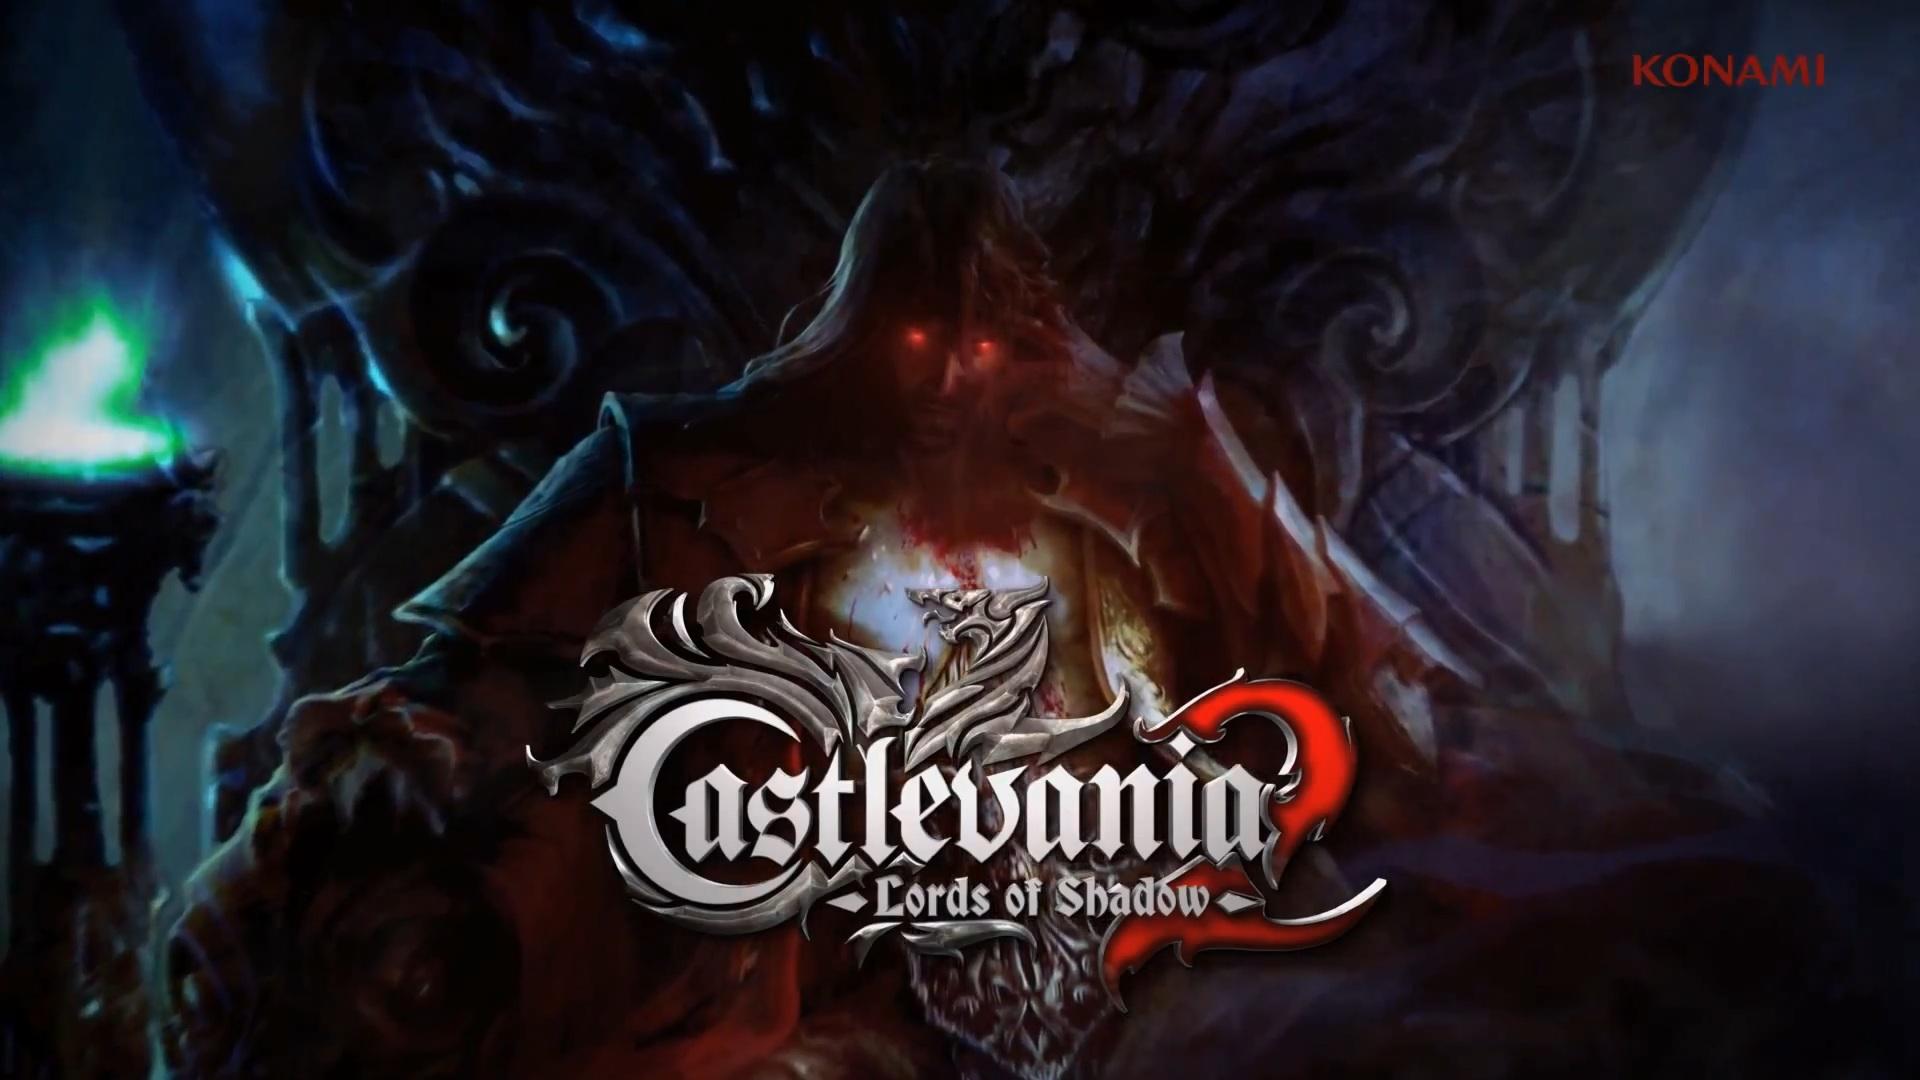 Upcoming Game Februari Castlevania Lord of Shadow 2!